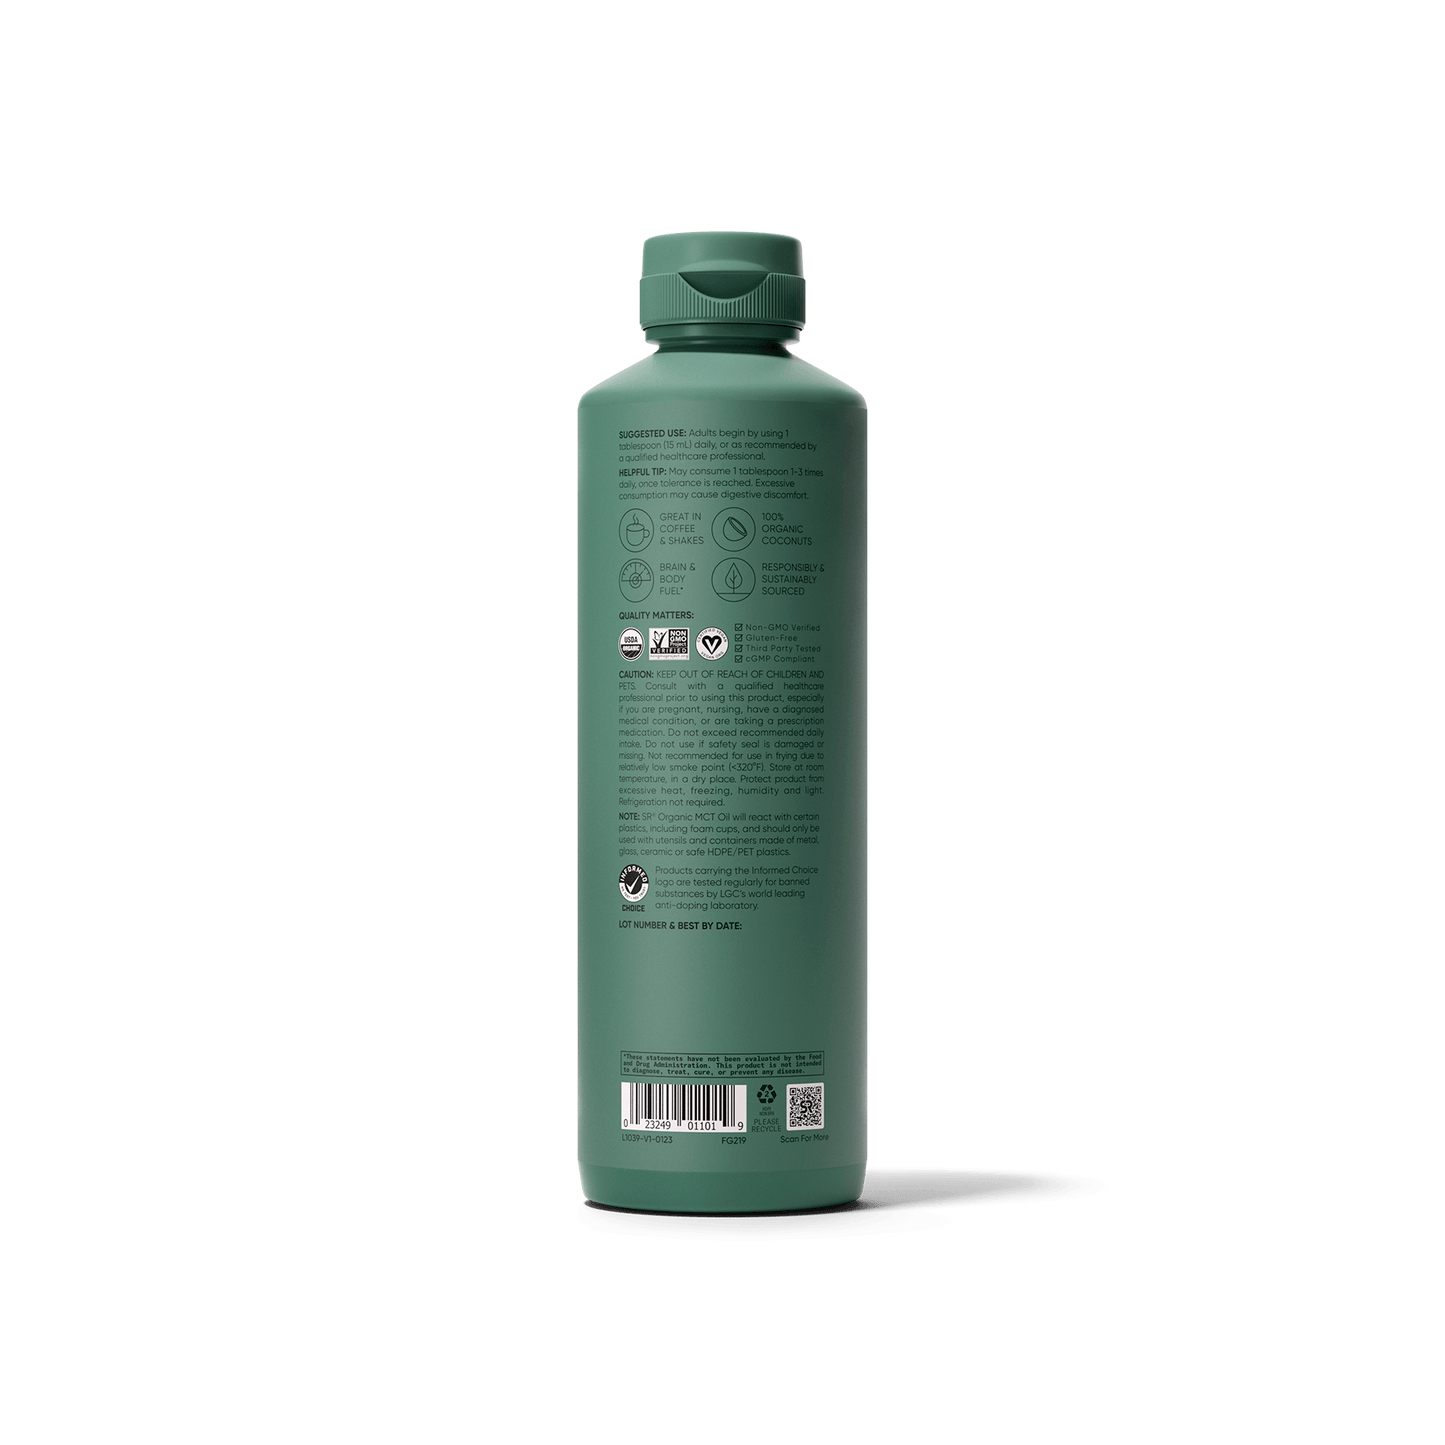 A bottle of Organic MCT Oil Full Spectrum shampoo by Sports Research on a green background.